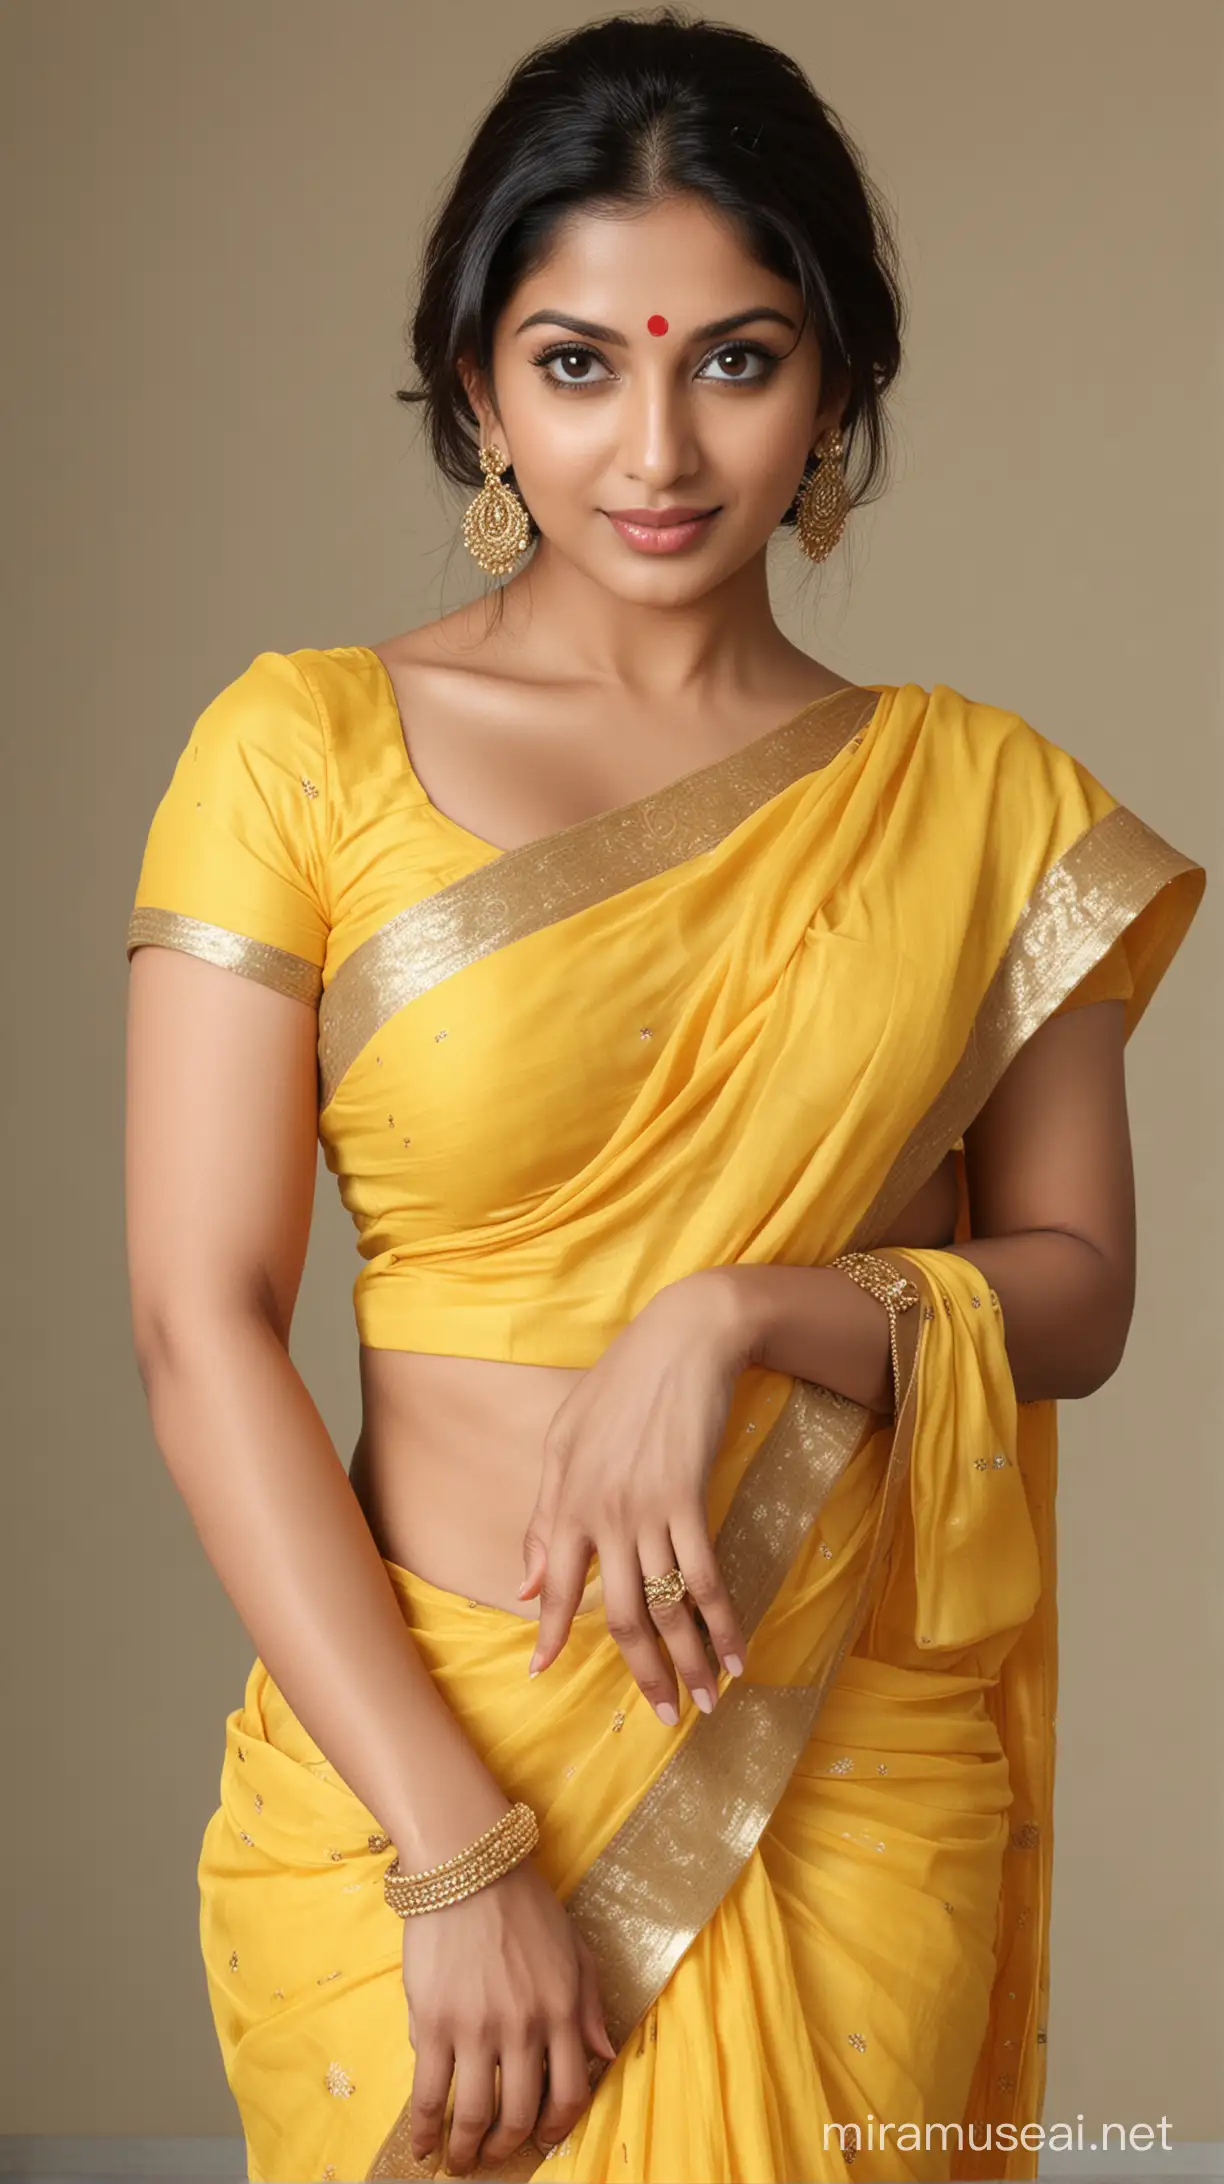 Hot Indian lady in yellow saree and blouse 